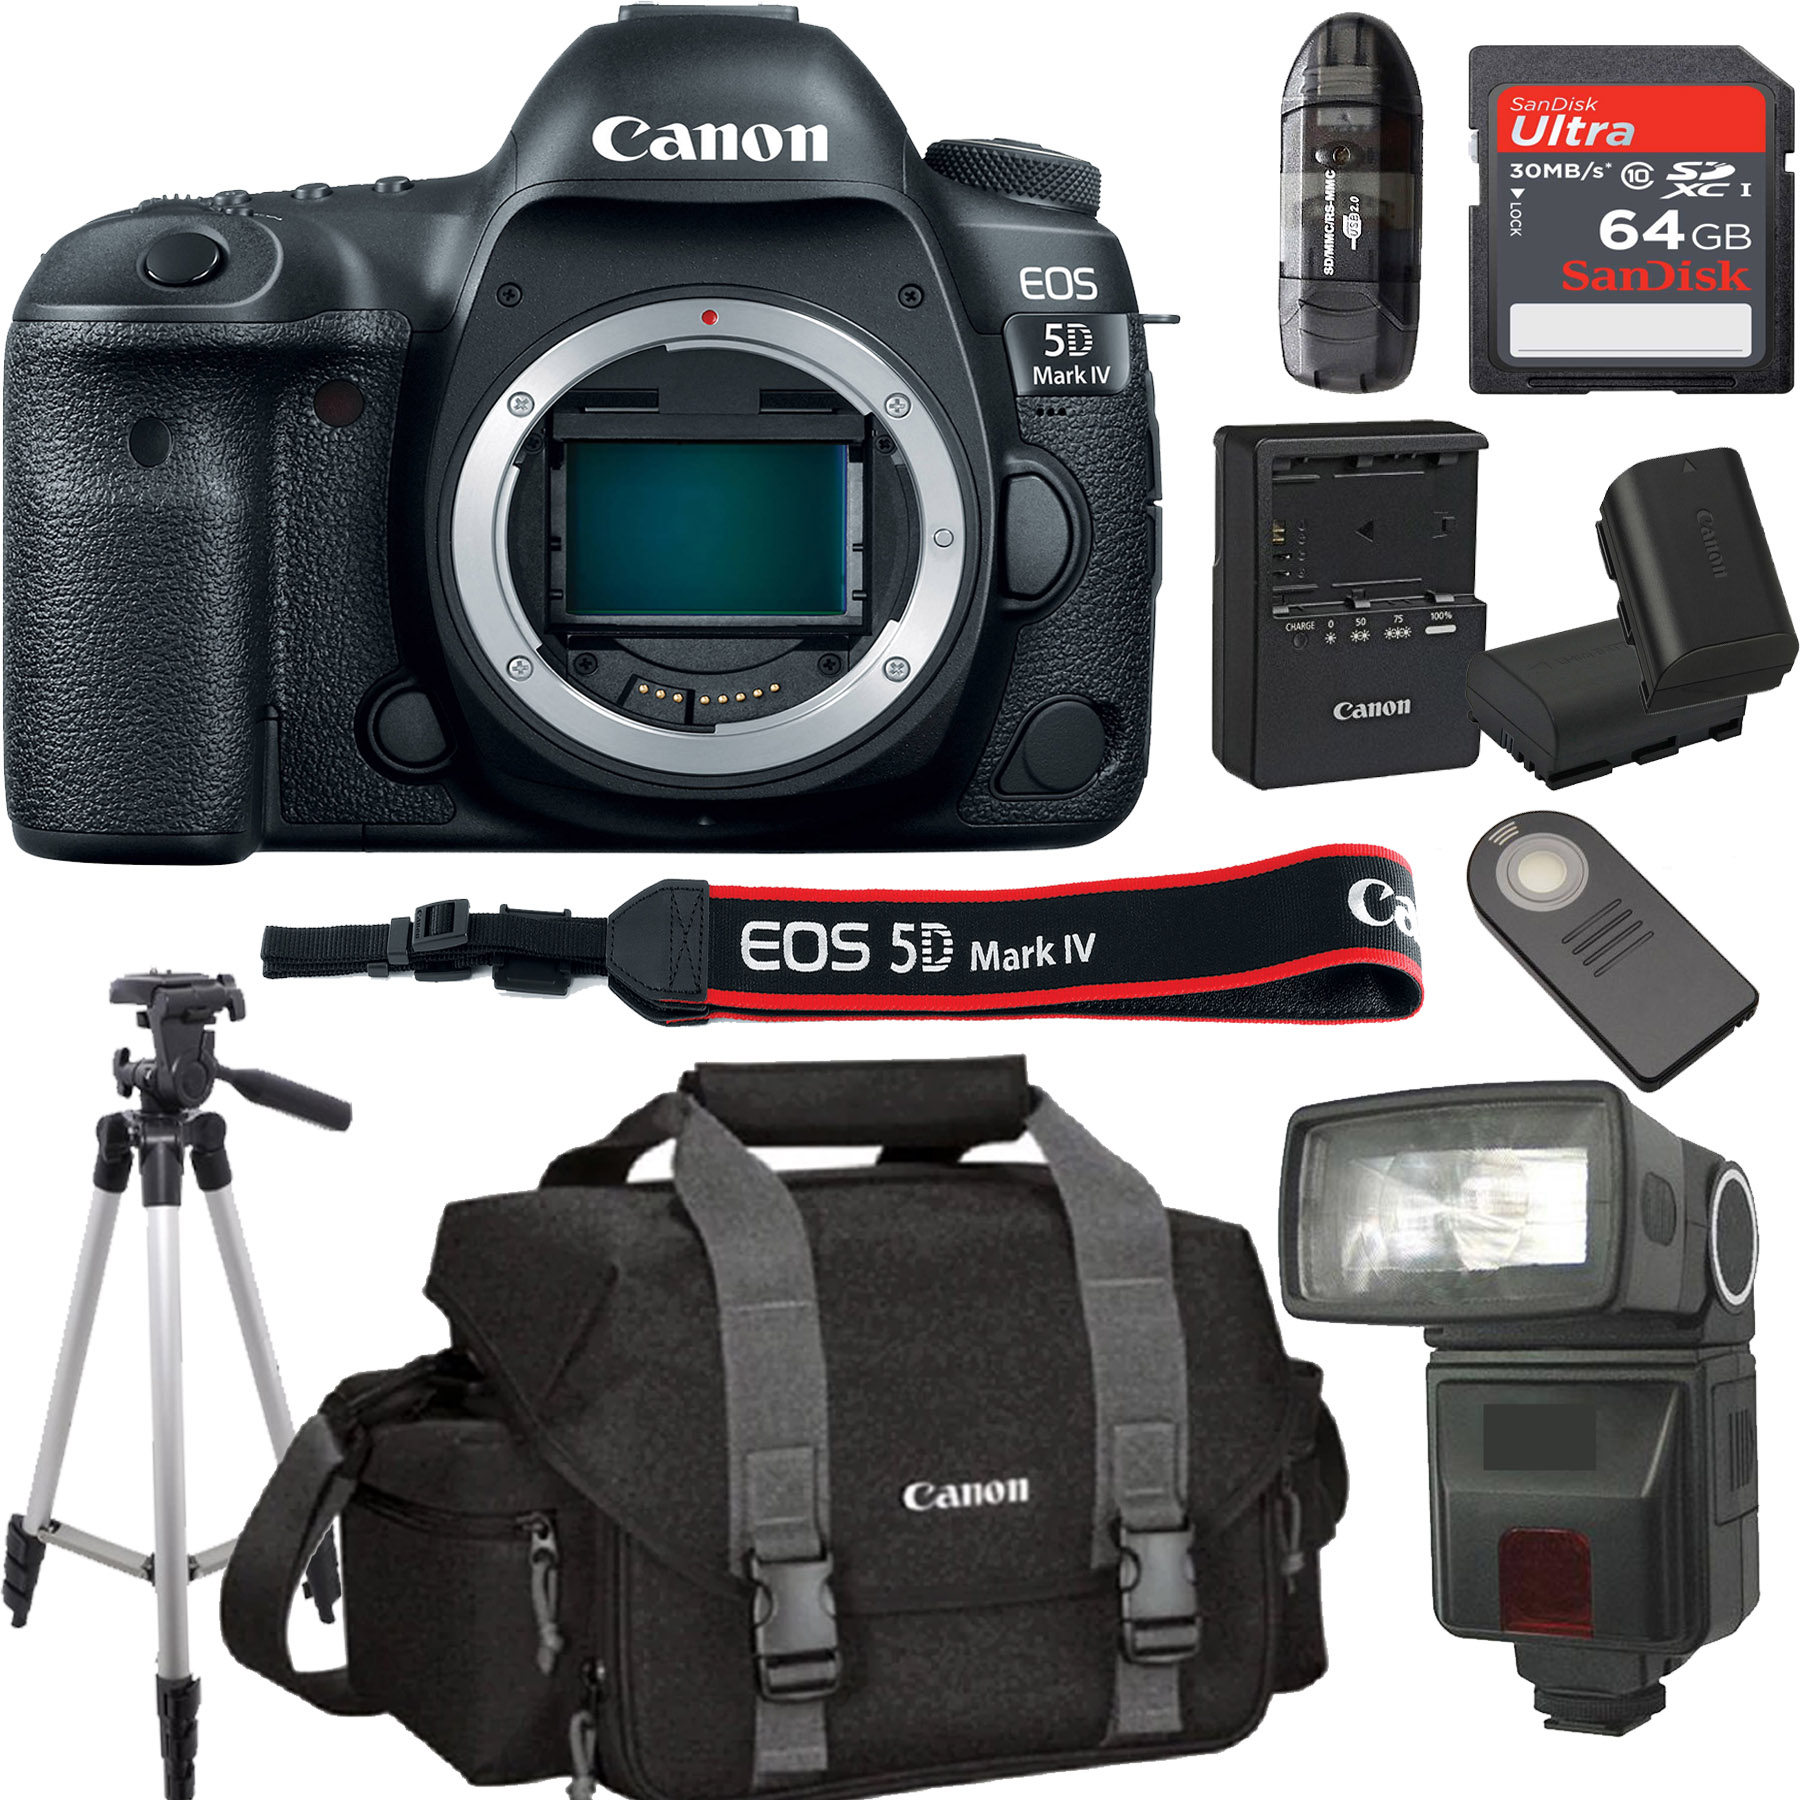 Canon EOS 5D Mark IV Full Frame Digital SLR Camera Body Only (No Lens) Bundle + 64GB High Speed Memory Card + Canon 300DG Deluxe Camera Bag + Wireless Remote Shutter + Tripod + More - image 1 of 2